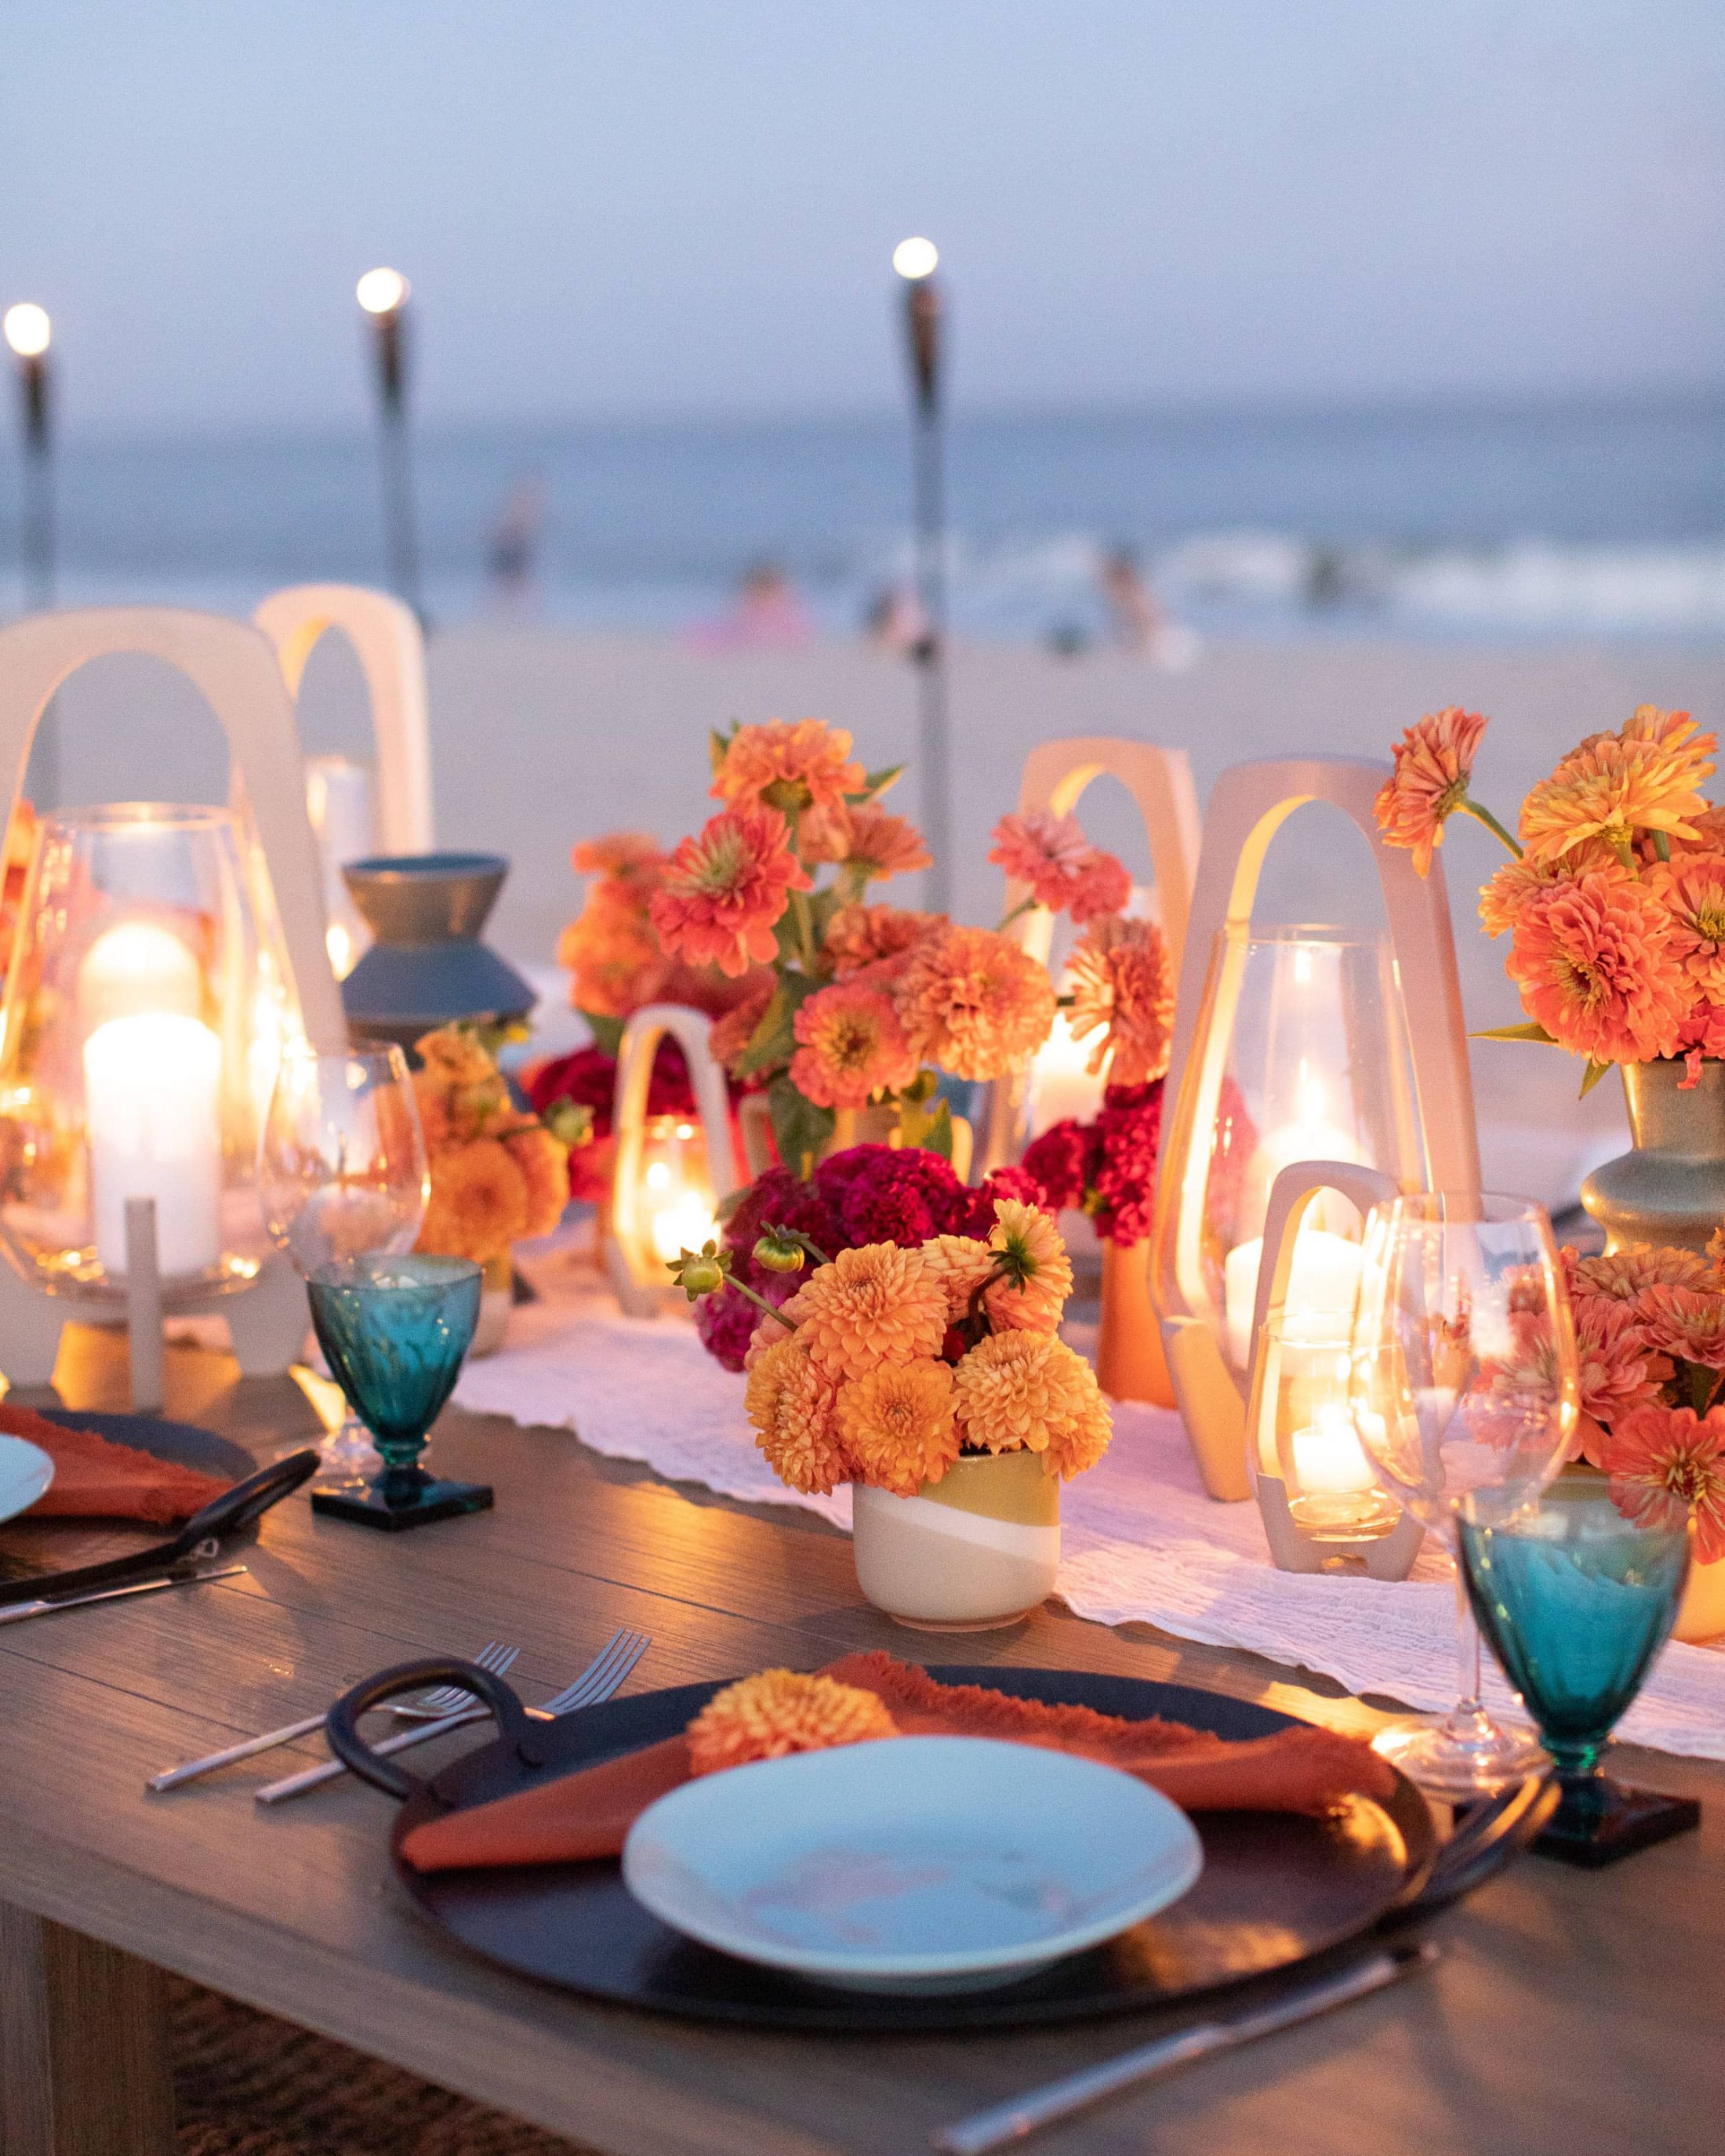 Night falling table set-up with candles at 40th birthday dinner on the beach in Southampton | Photo by Luis Zepeda